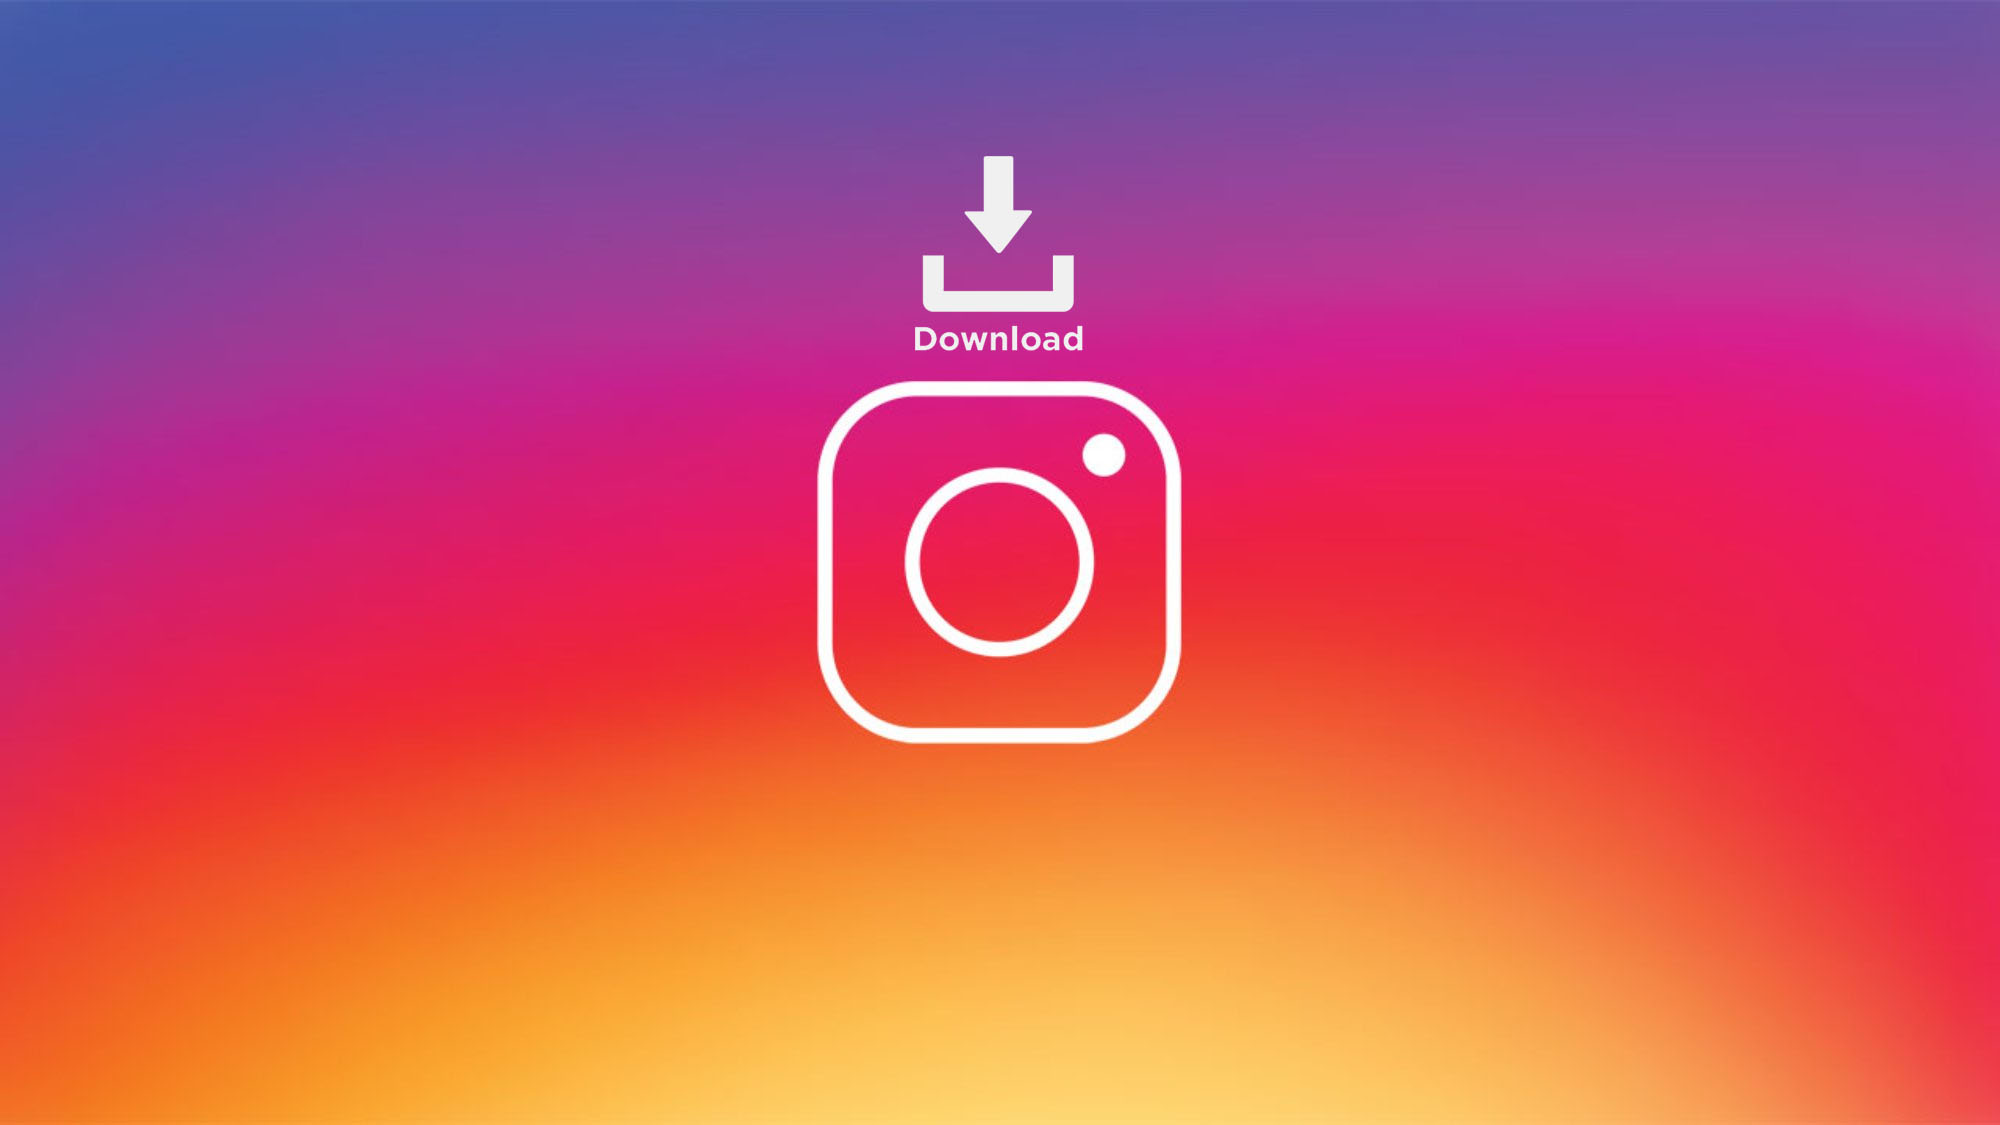 How to Download Photos from Instagram How to Download Photos from Instagram